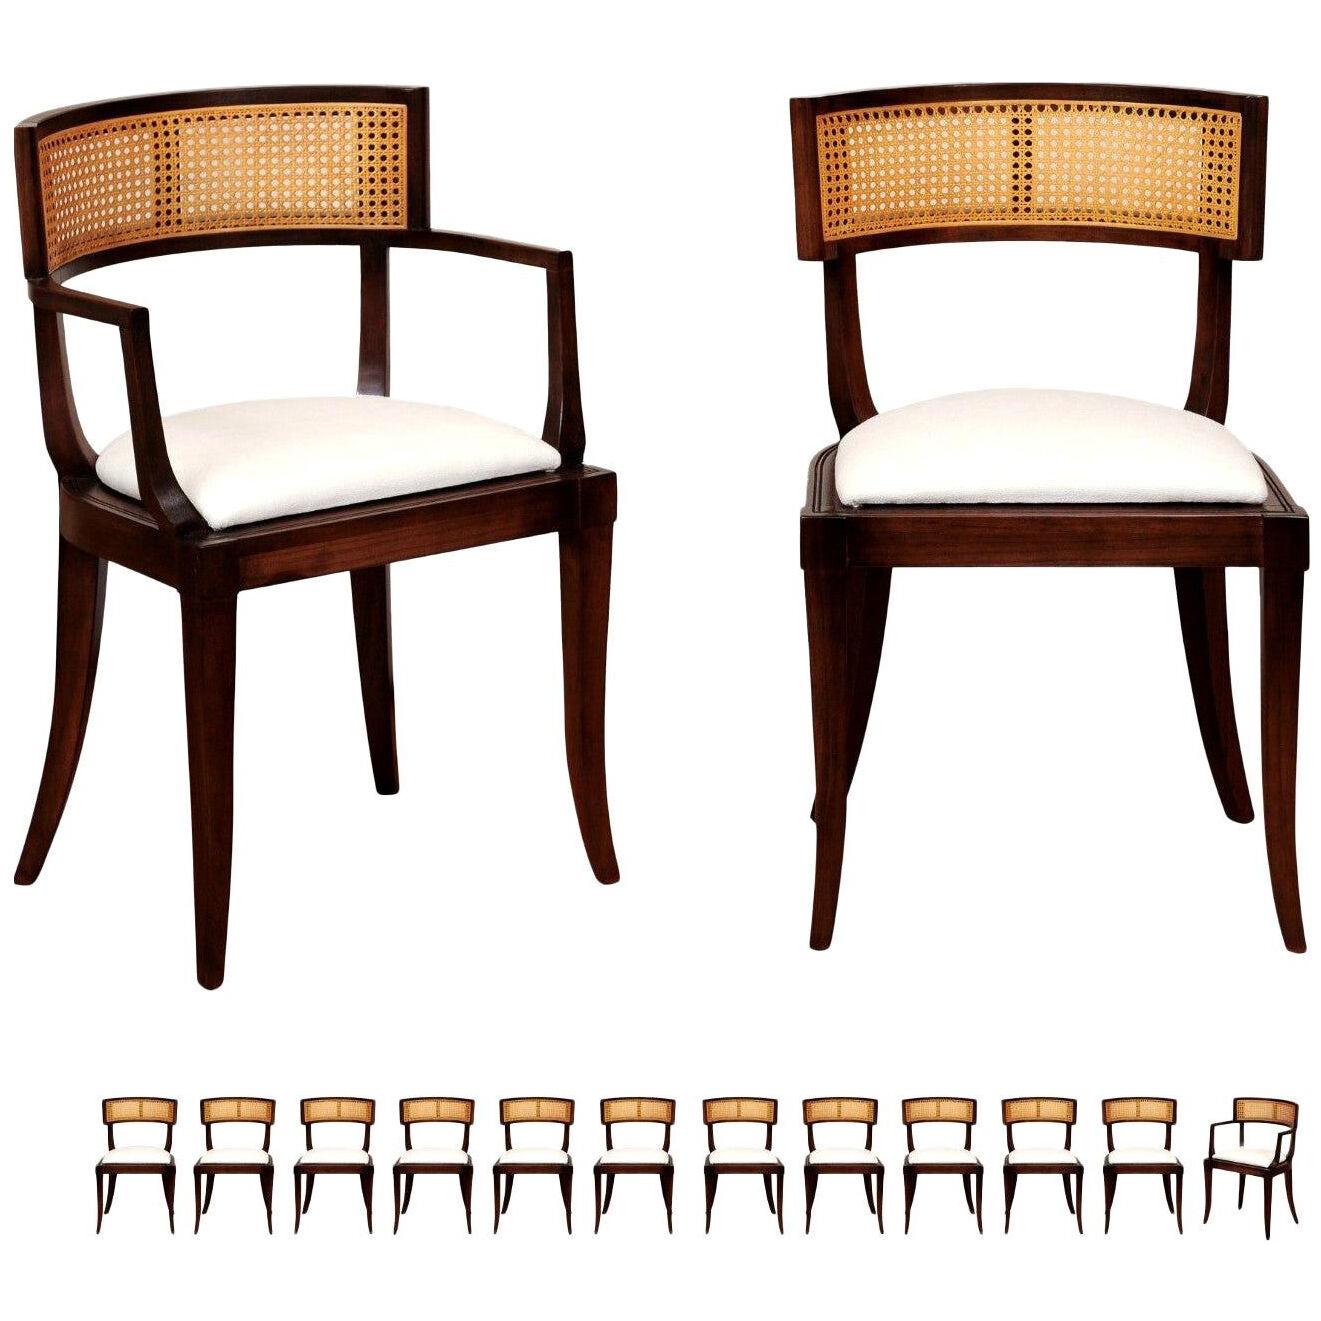 Exquisite Set of Fourteen Klismos Cane Dining Chairs by Baker, circa 1958